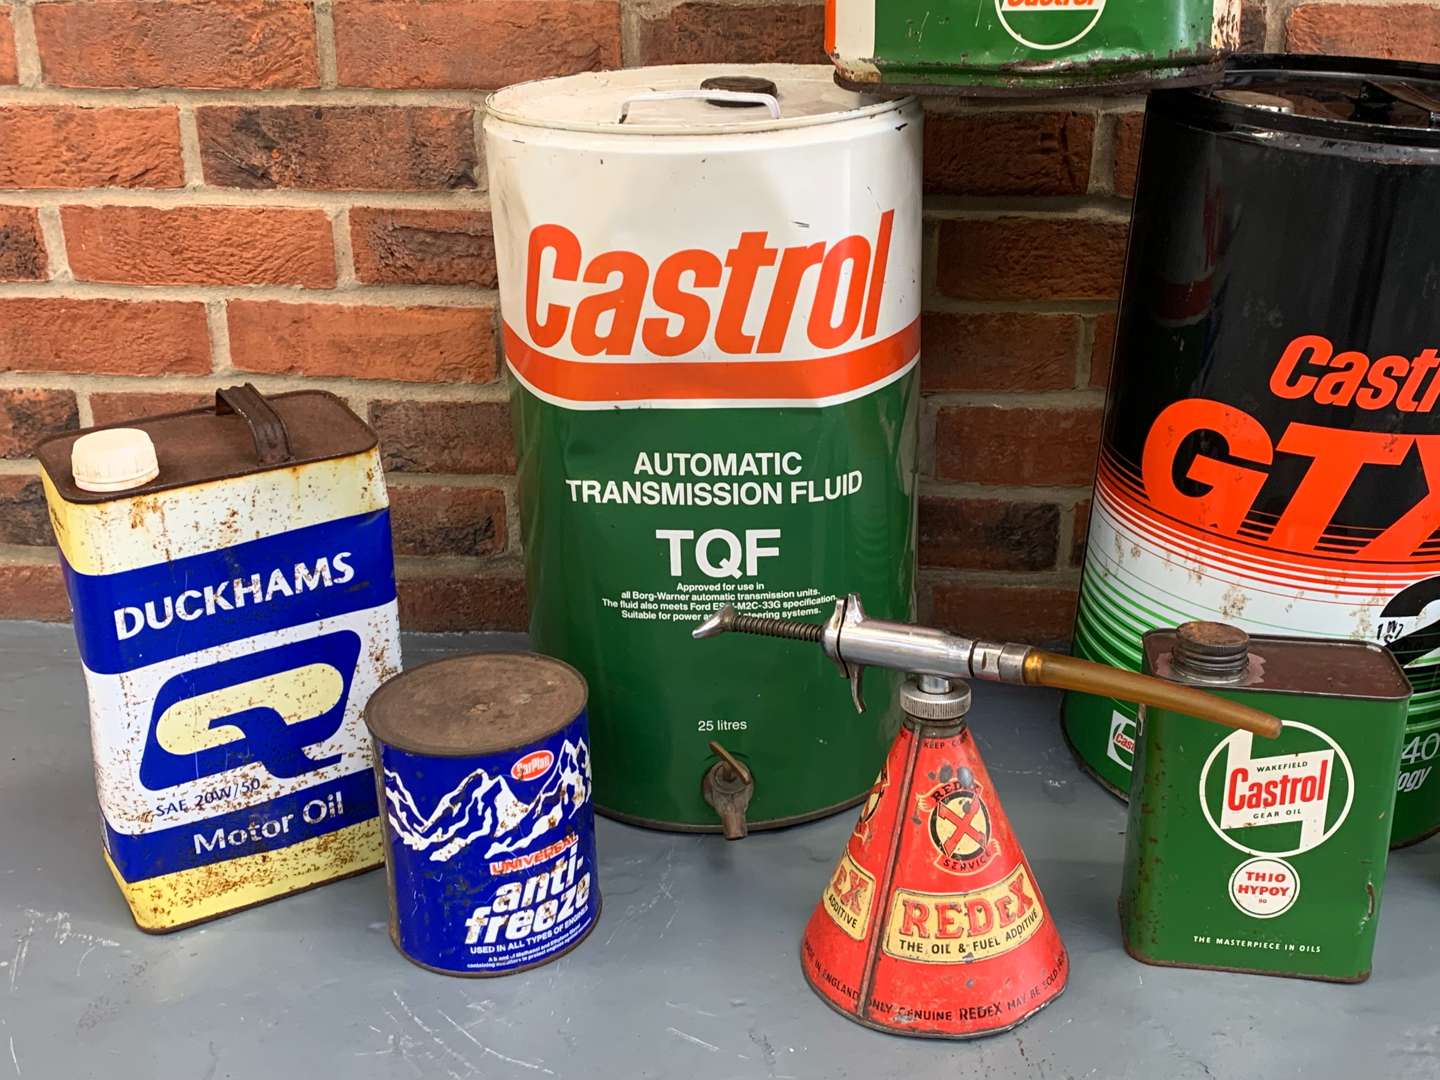 <p>Eight Vintage Oil/Grease Cans, Castrol, Redex Etc</p>